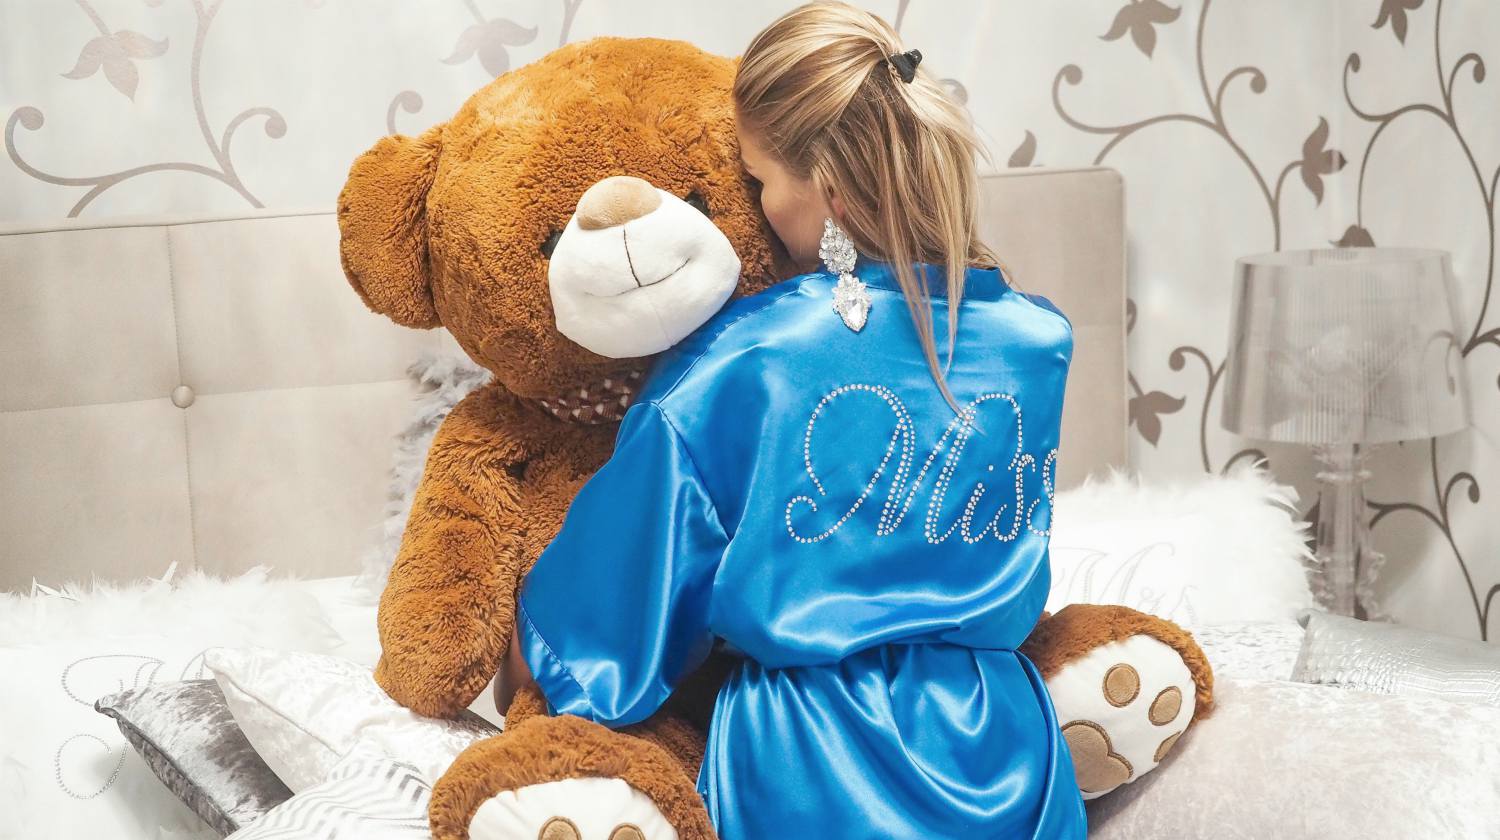 woman wearing custom robe hudding a big teddy bear | Why Personalized Robes Are A Perfect Gift | personalized robes | personalized robes for her | Featured